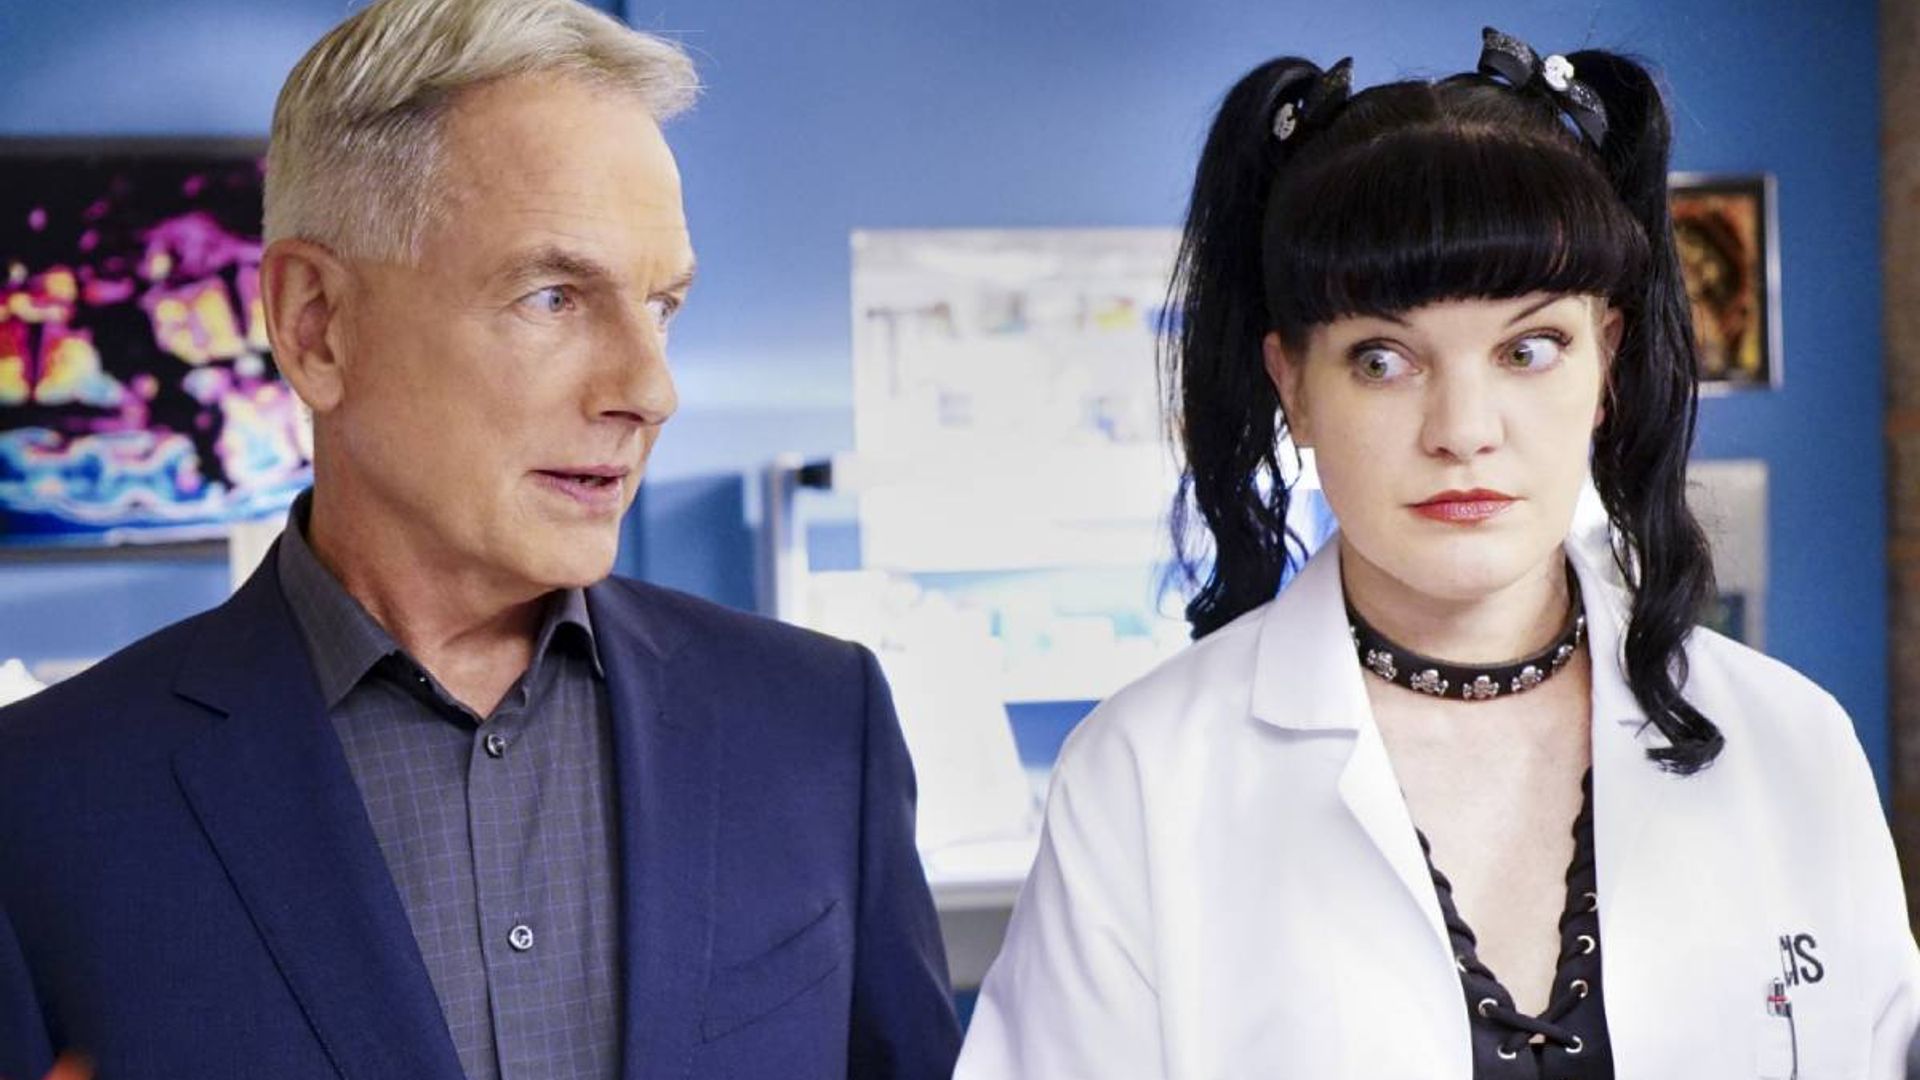 ncis pauley perrette return to show discussed